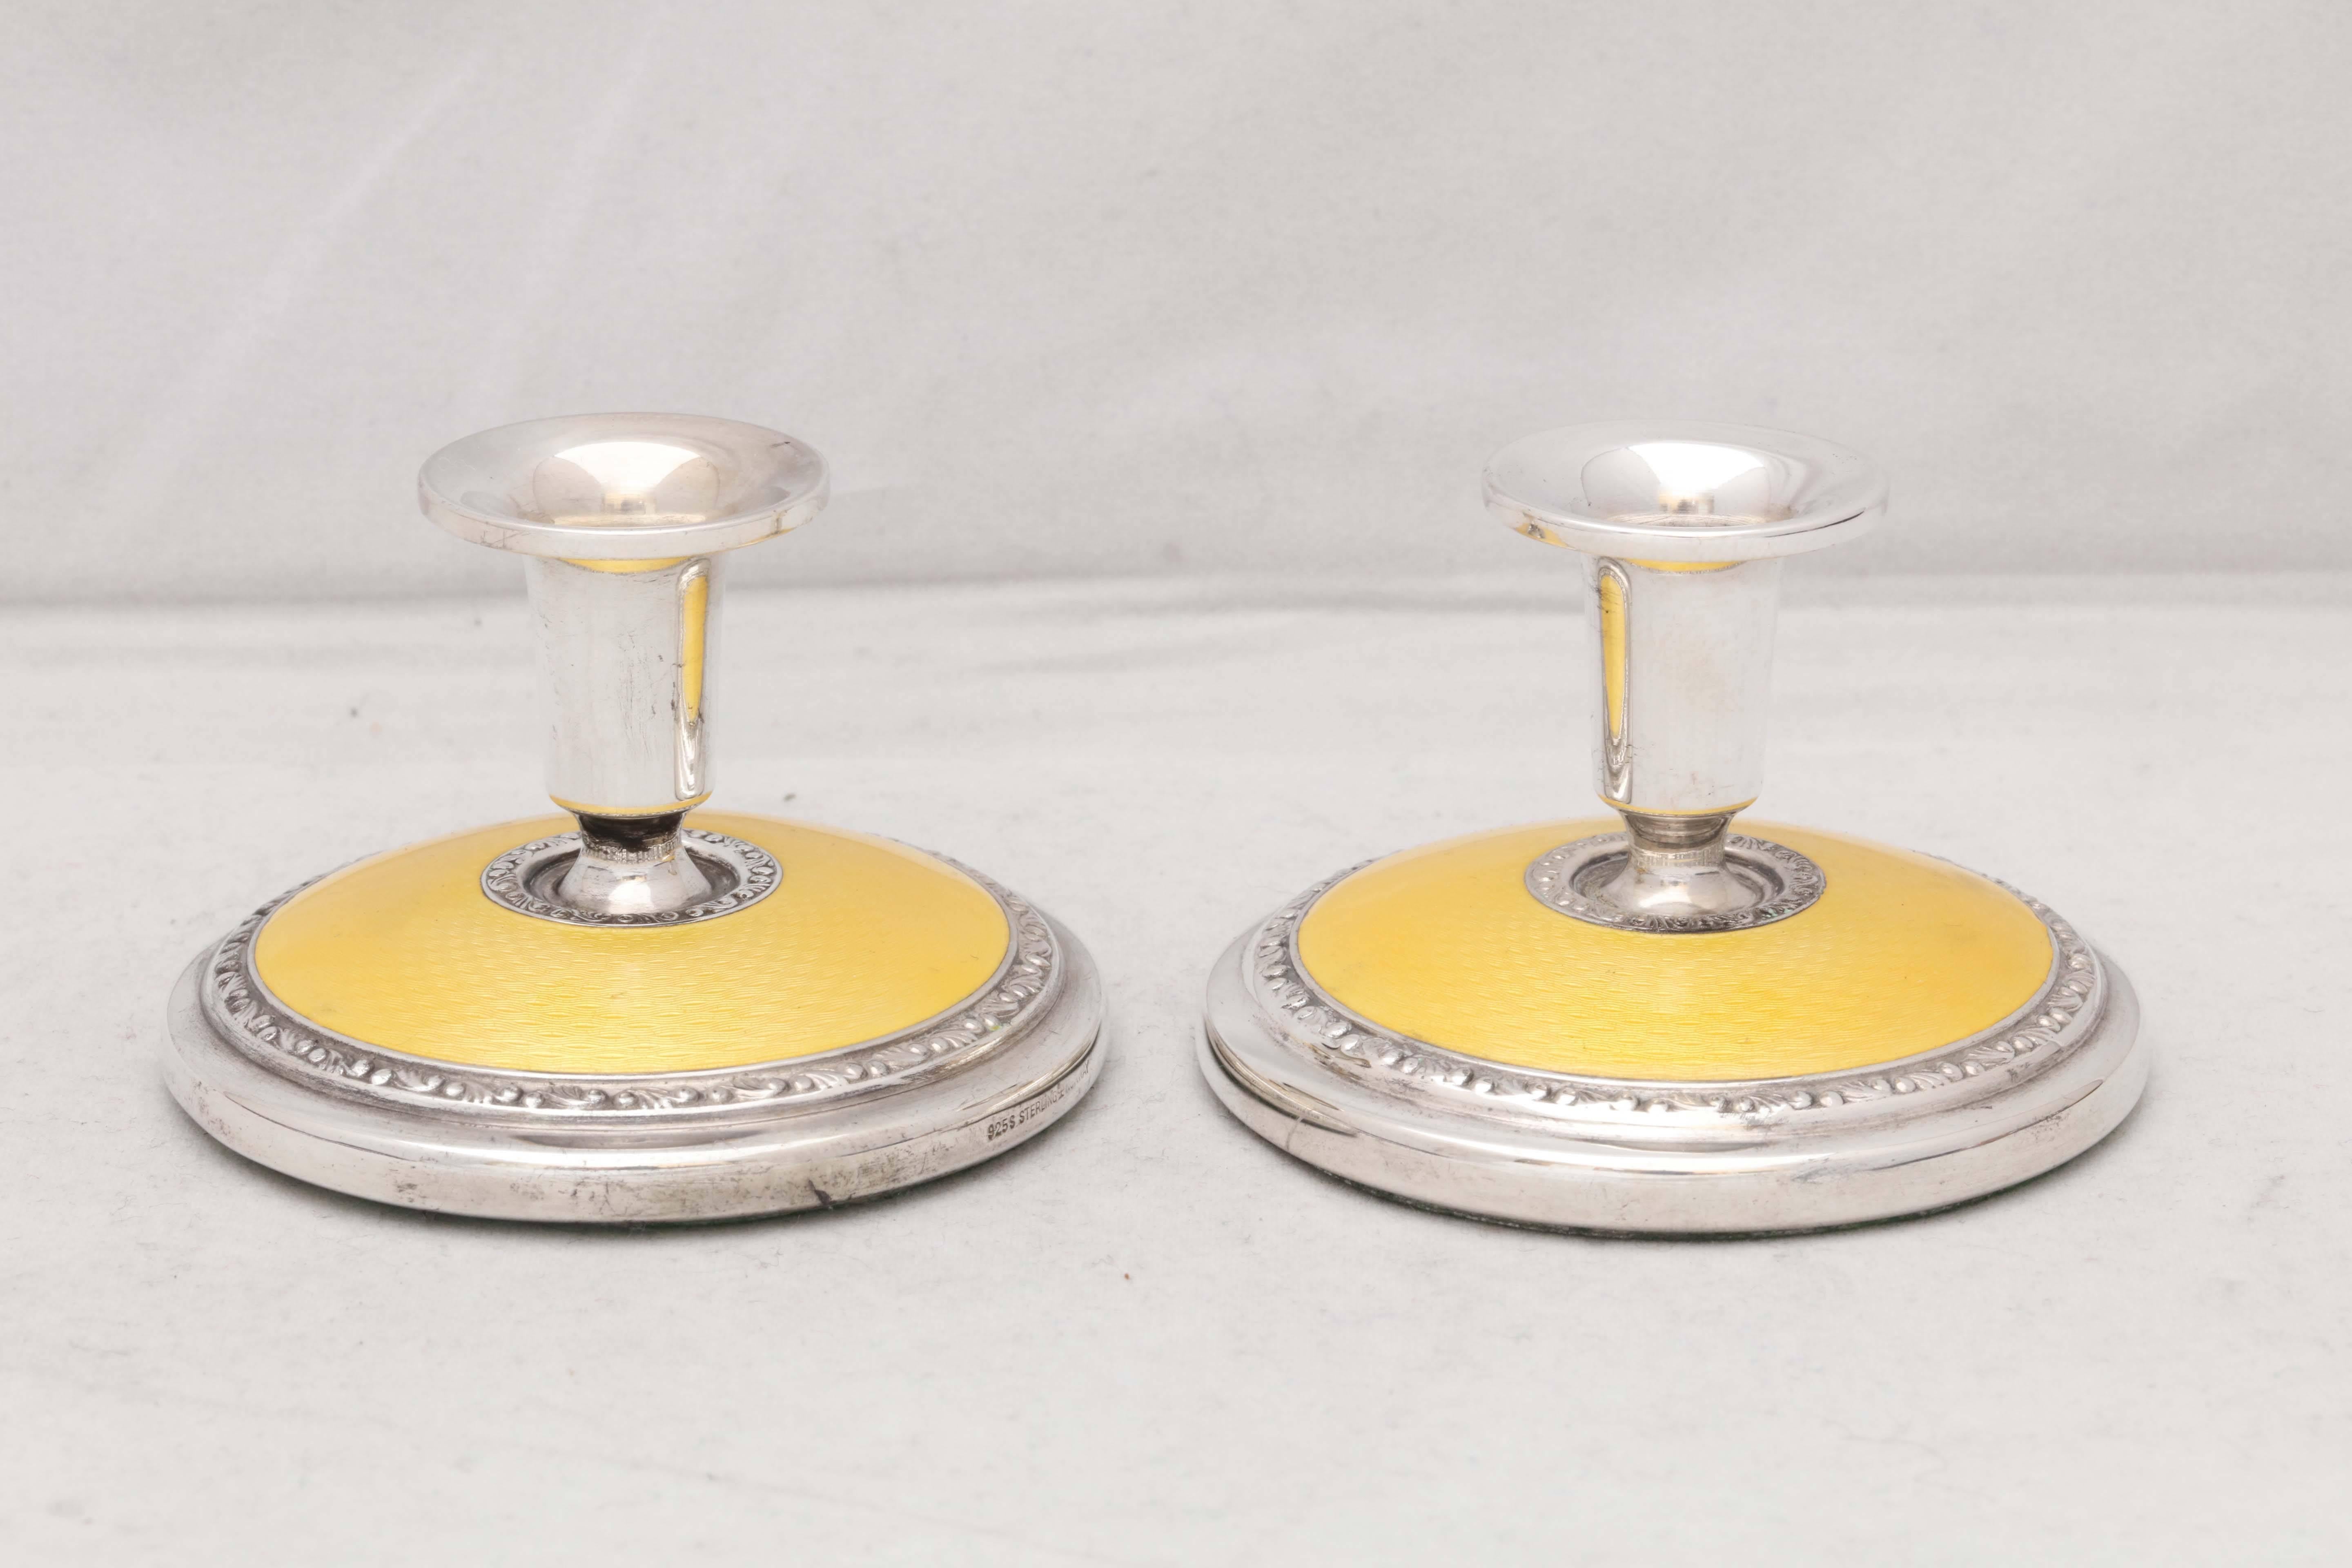 Pair of Art Deco, sterling silver and bright yellow guilloche enamel candlesticks, Norway, circa 1930s, Norsk Solwarrenindustri - makers. Measures: 2